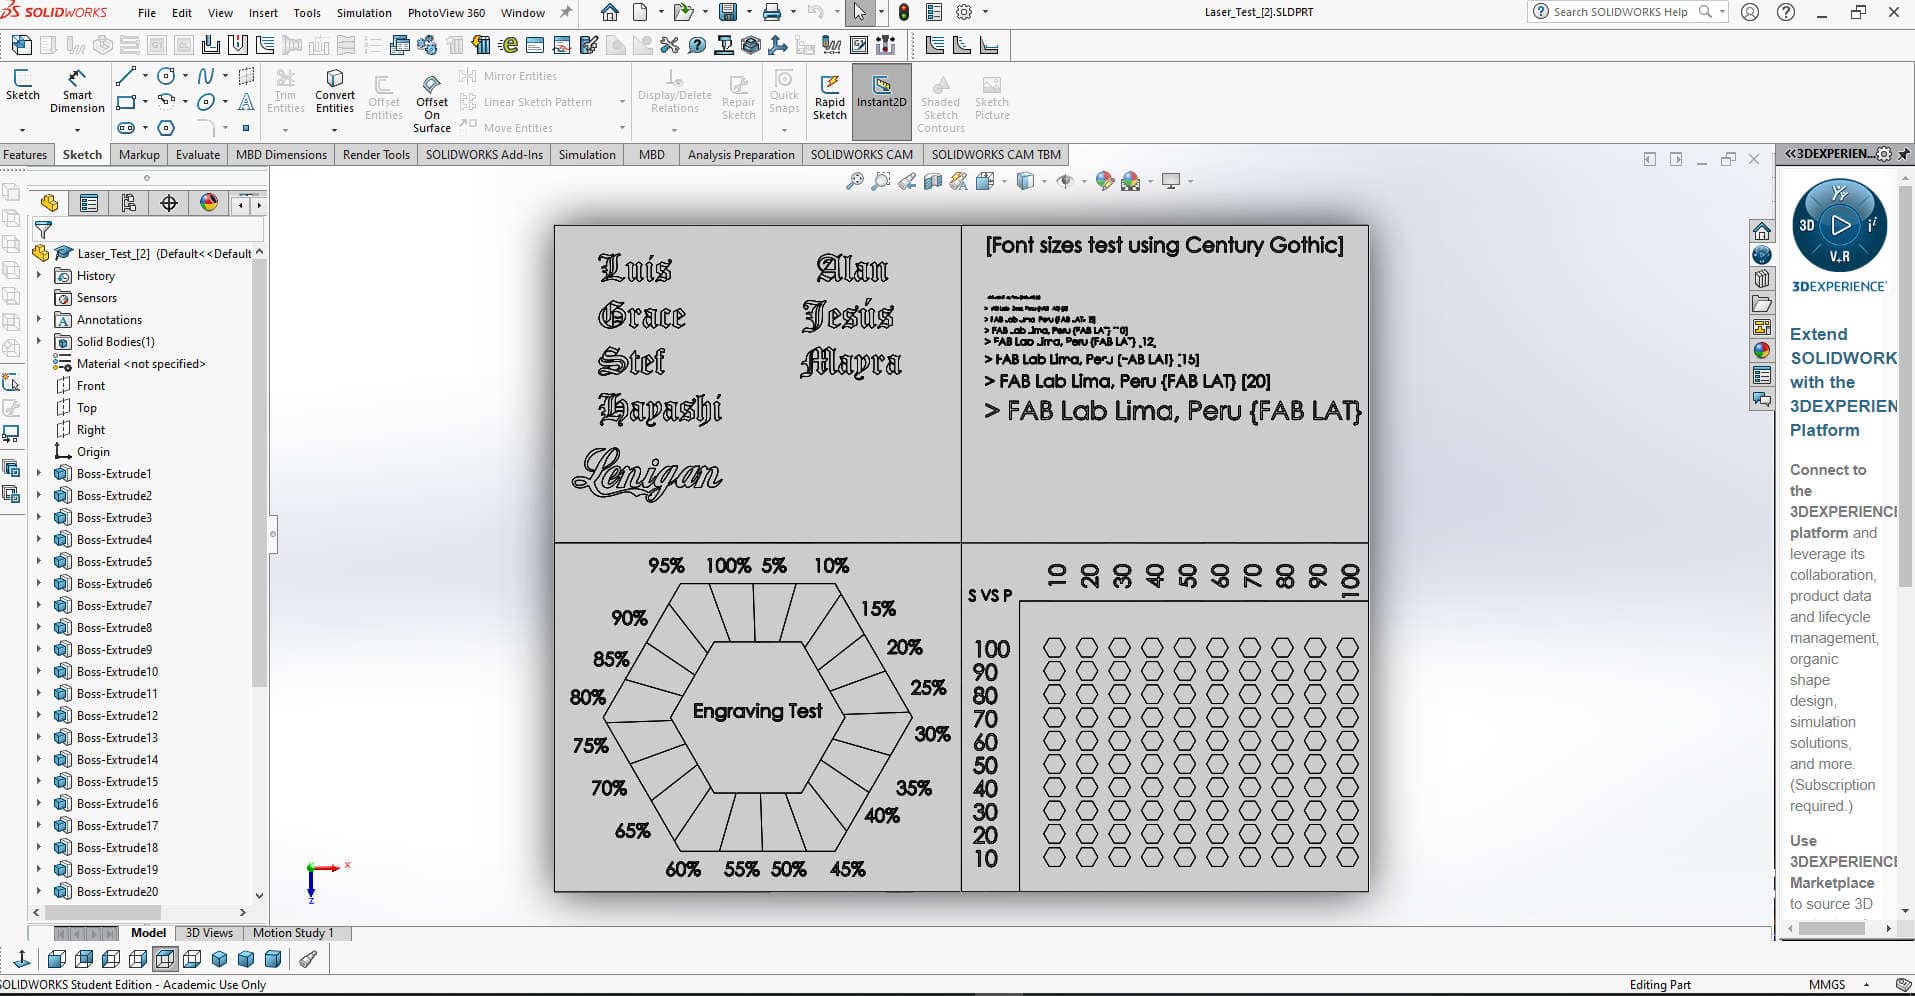 Dirty file? Clean it up, with the SOLIDWORKS Simulation Cleaning Utility